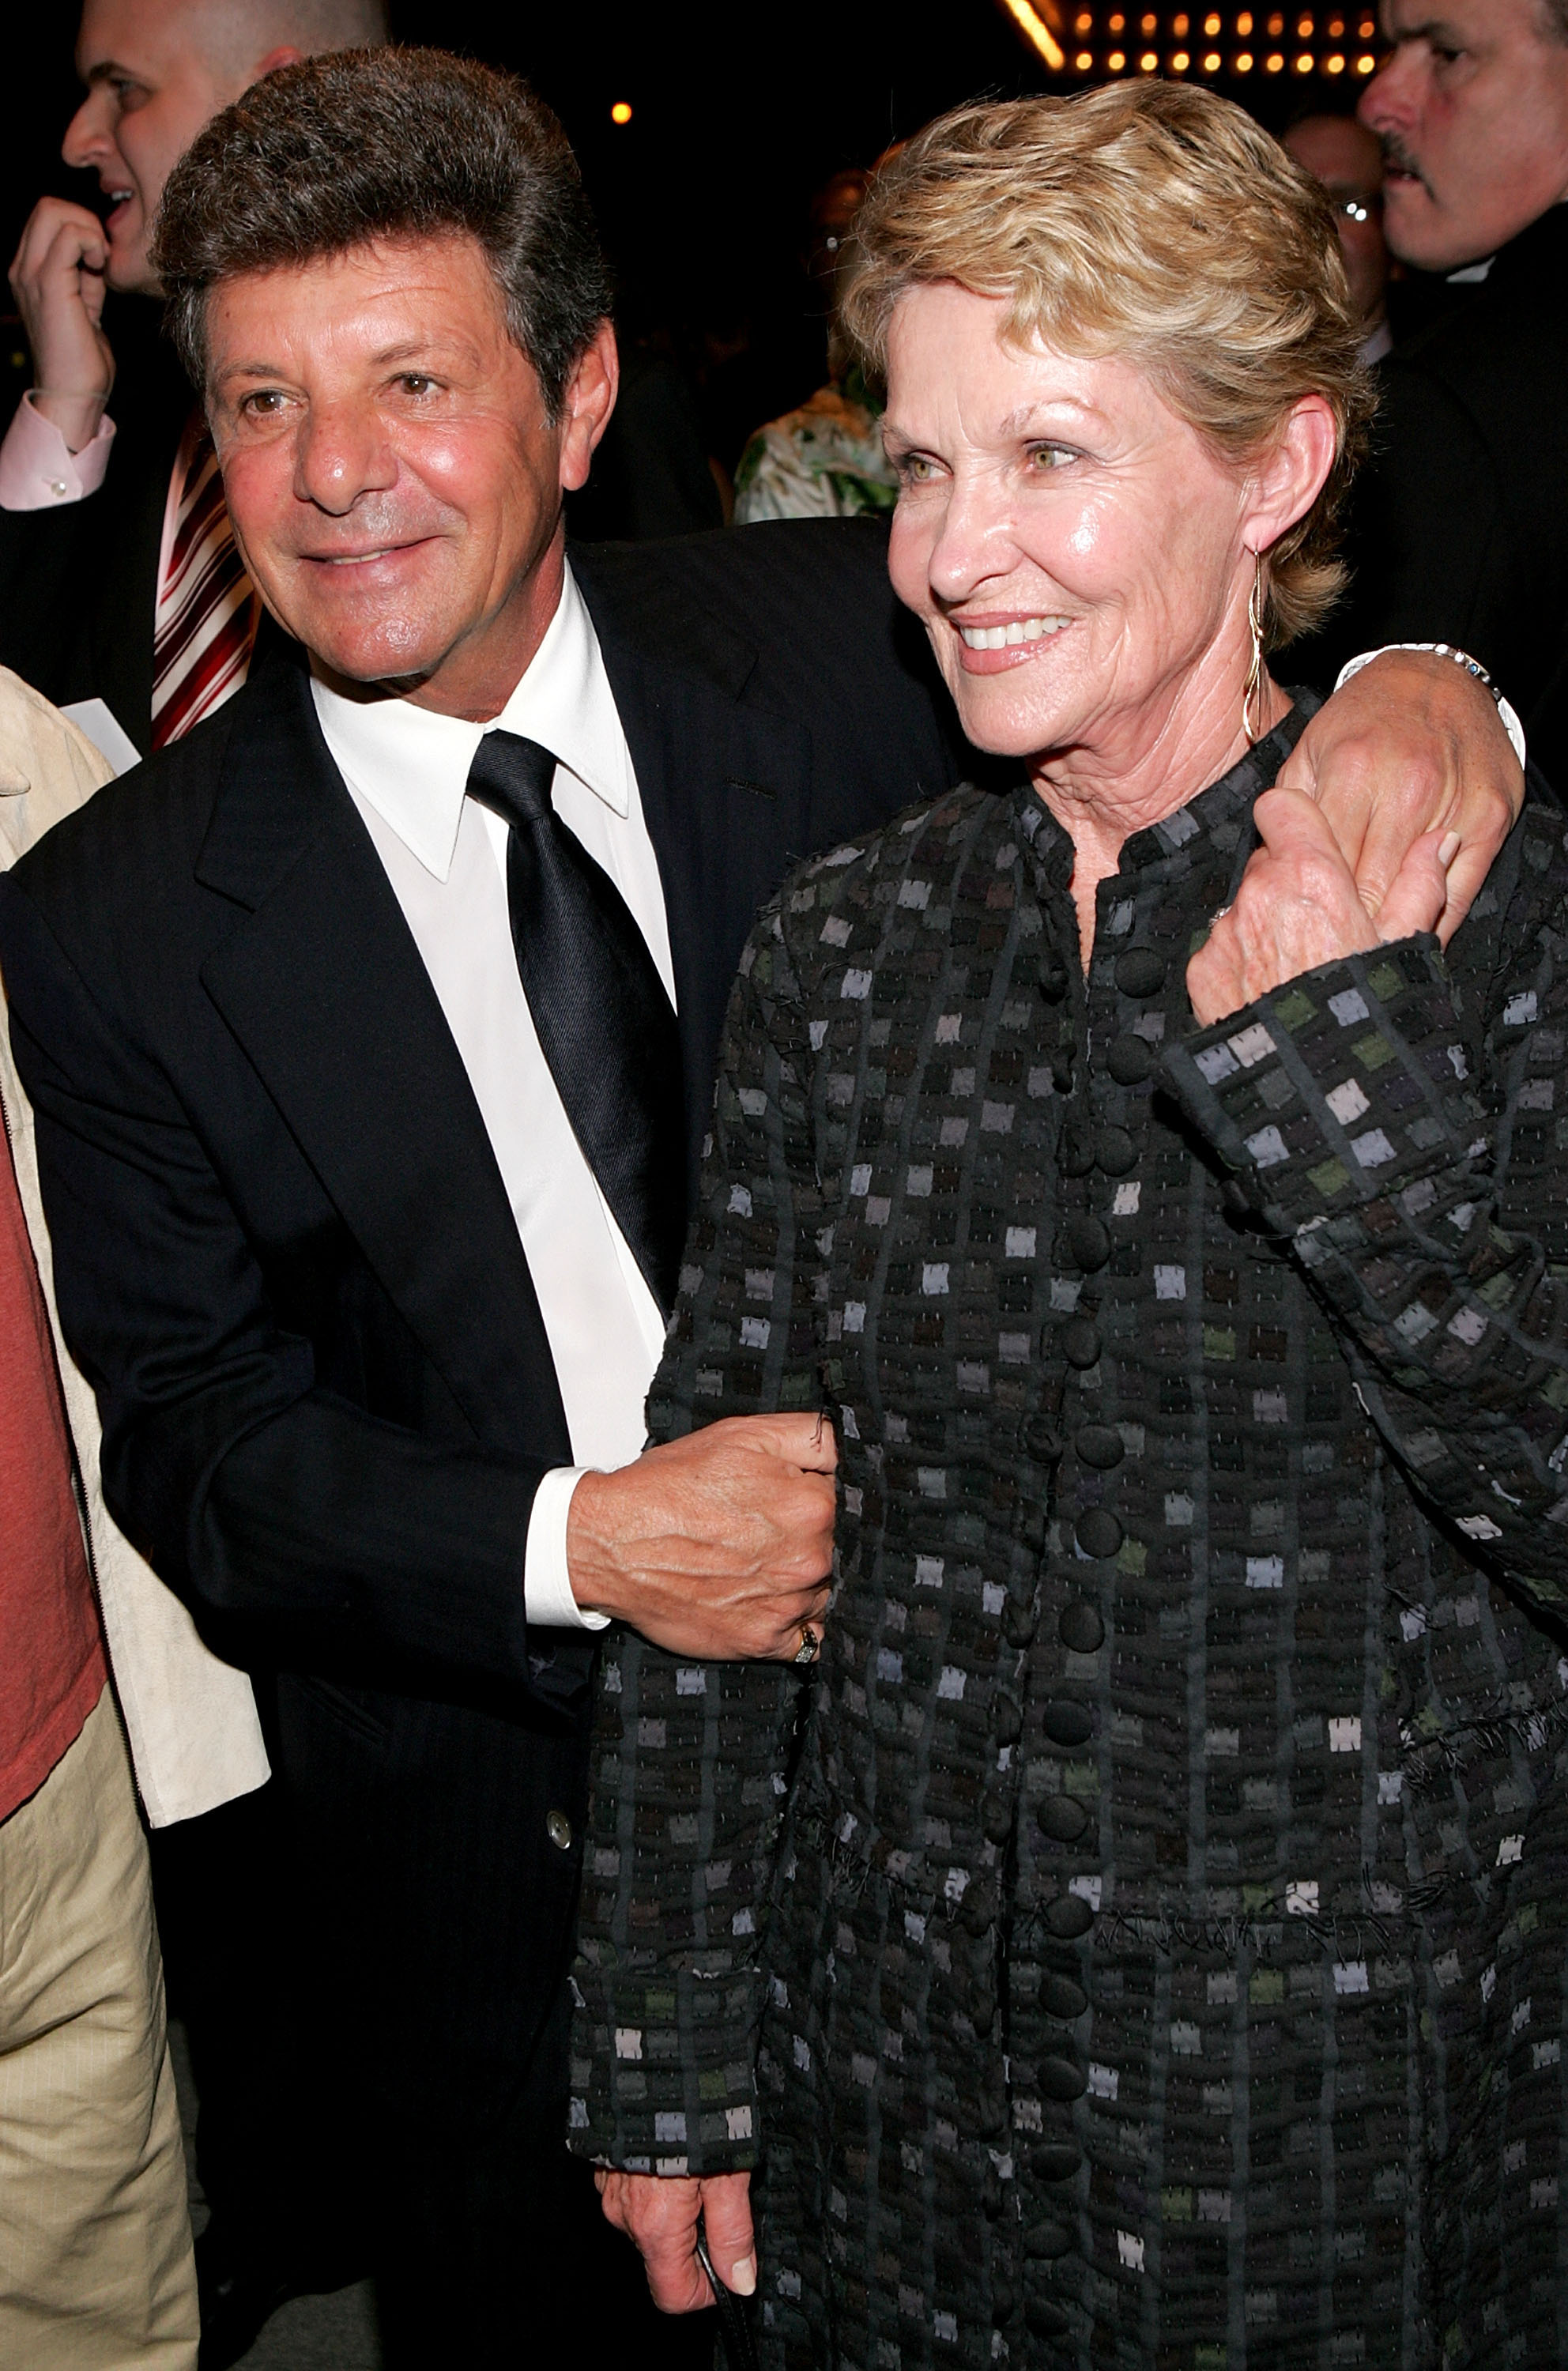  Frankie Avalon and his wife Kathryn Diebel attend the play opening night of "Jersey Boys" at the August Wilson Theater November 6, 2005 in New York City. | Source: Getty Images